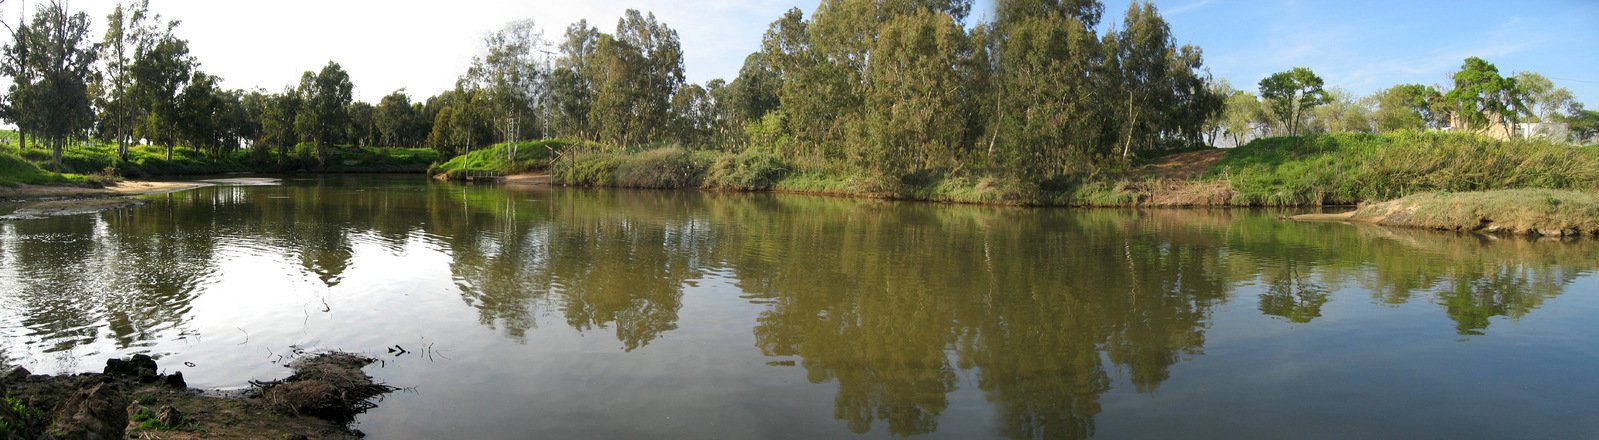 a lake surrounded by trees and bushes near the edge of a forest